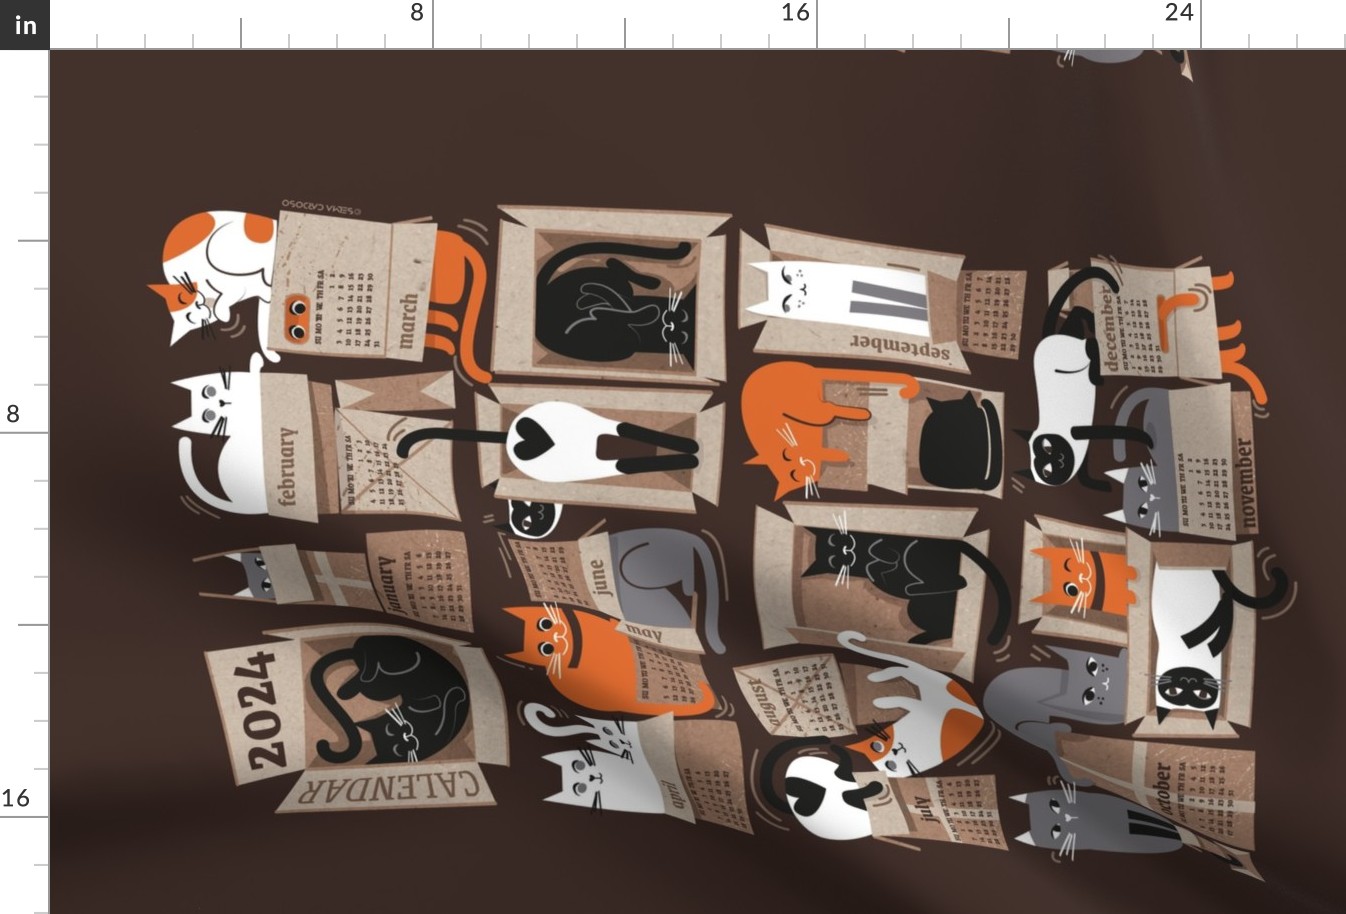 All packaged for 2024 // tea towel or wall hanging calendar dark oak brown background cute cats in cardboard boxes // purfect feline architecture